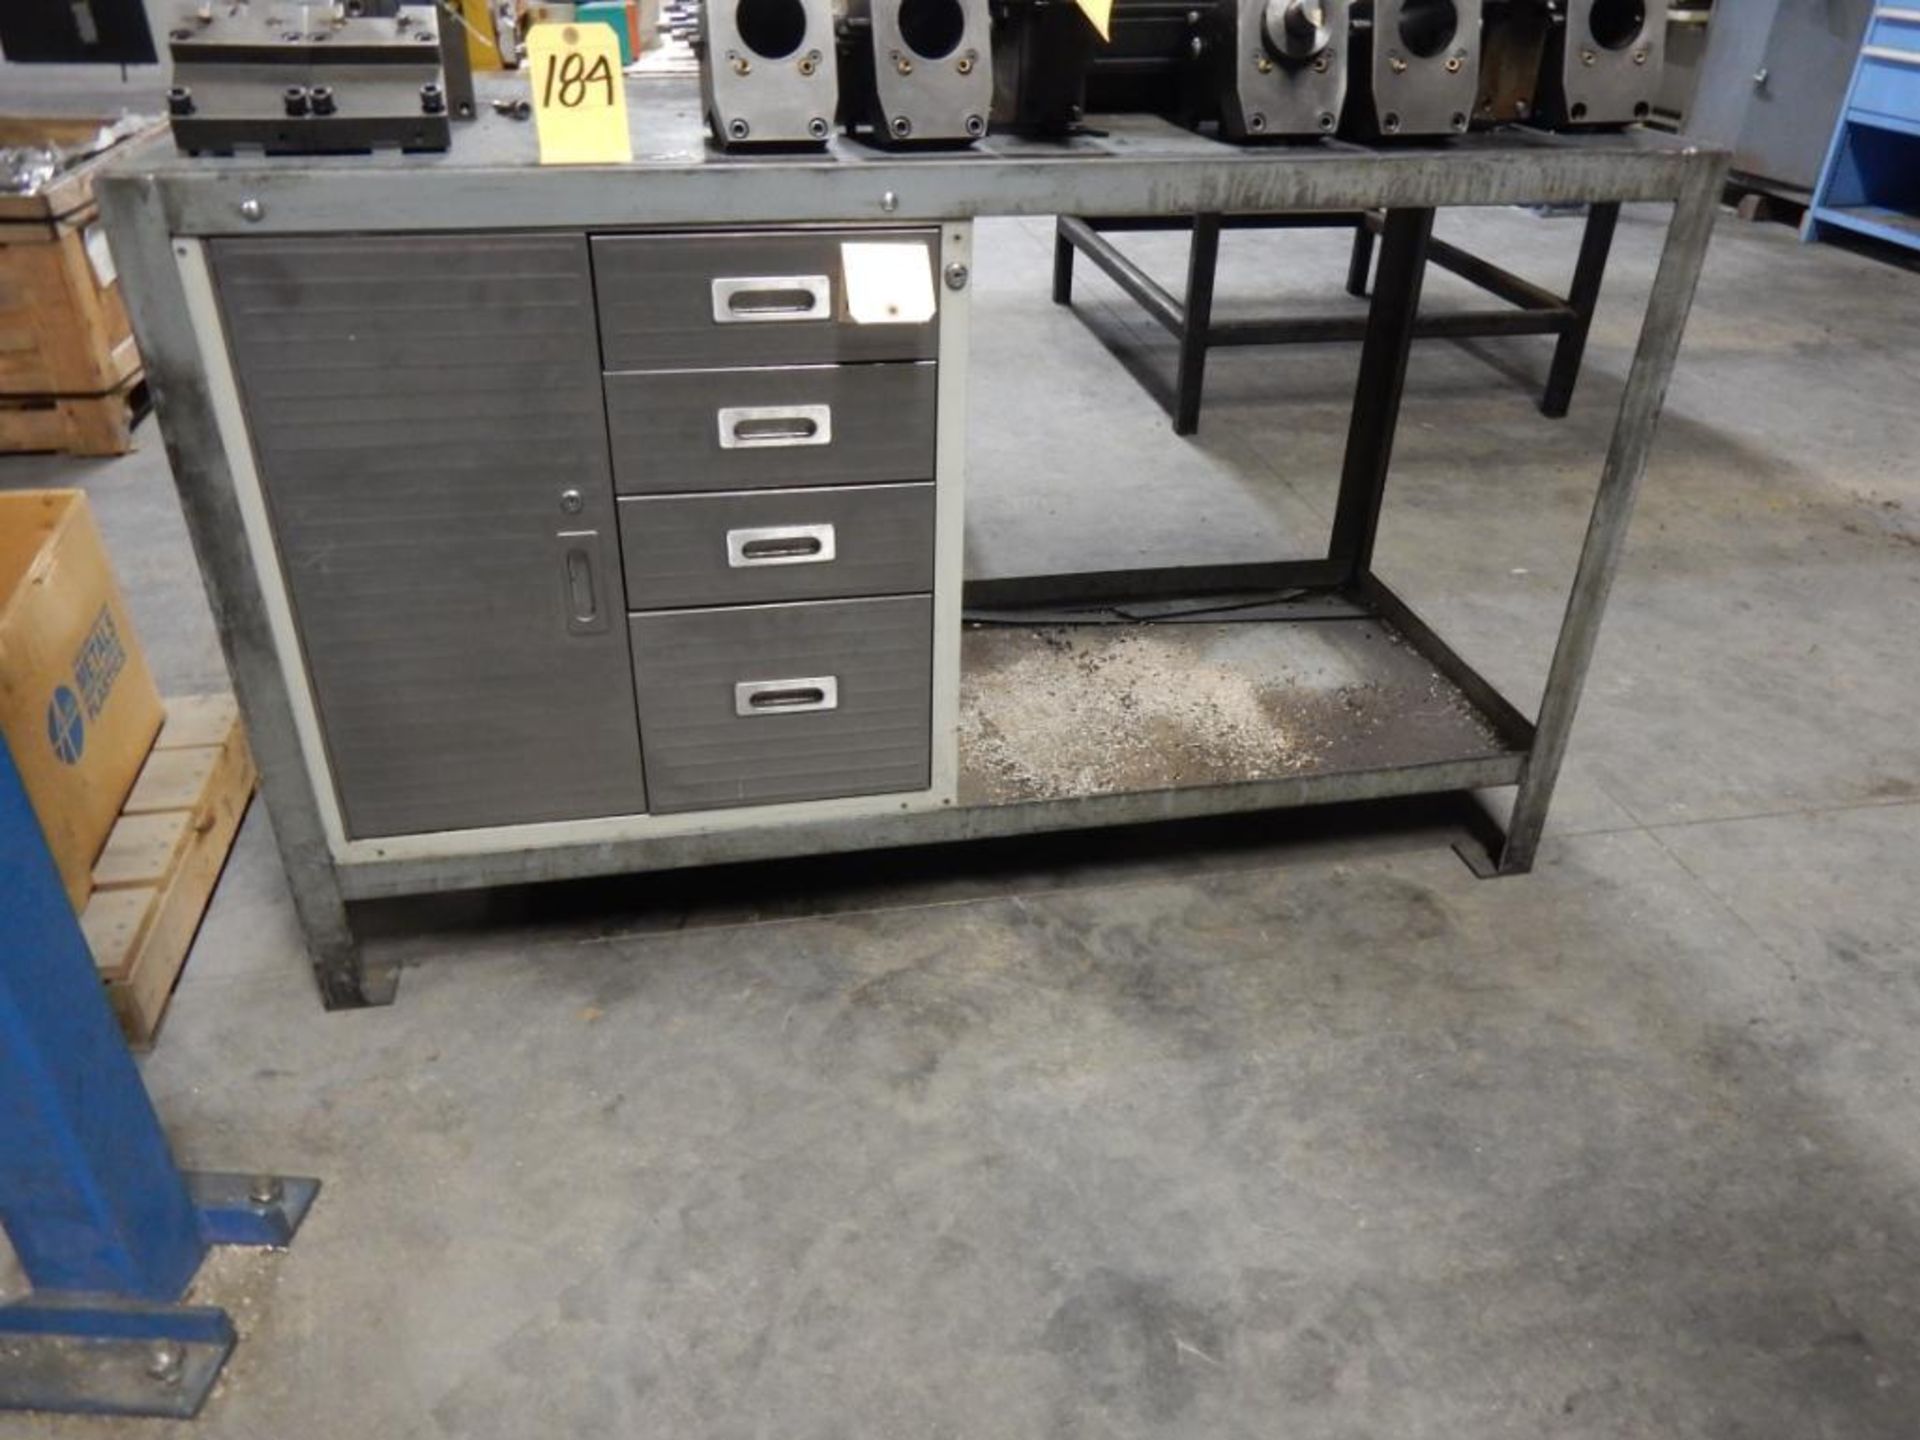 LOT 2' X 5' METAL TABLE W/4-DRAWER TOOL CABINET - NO CONTENTS